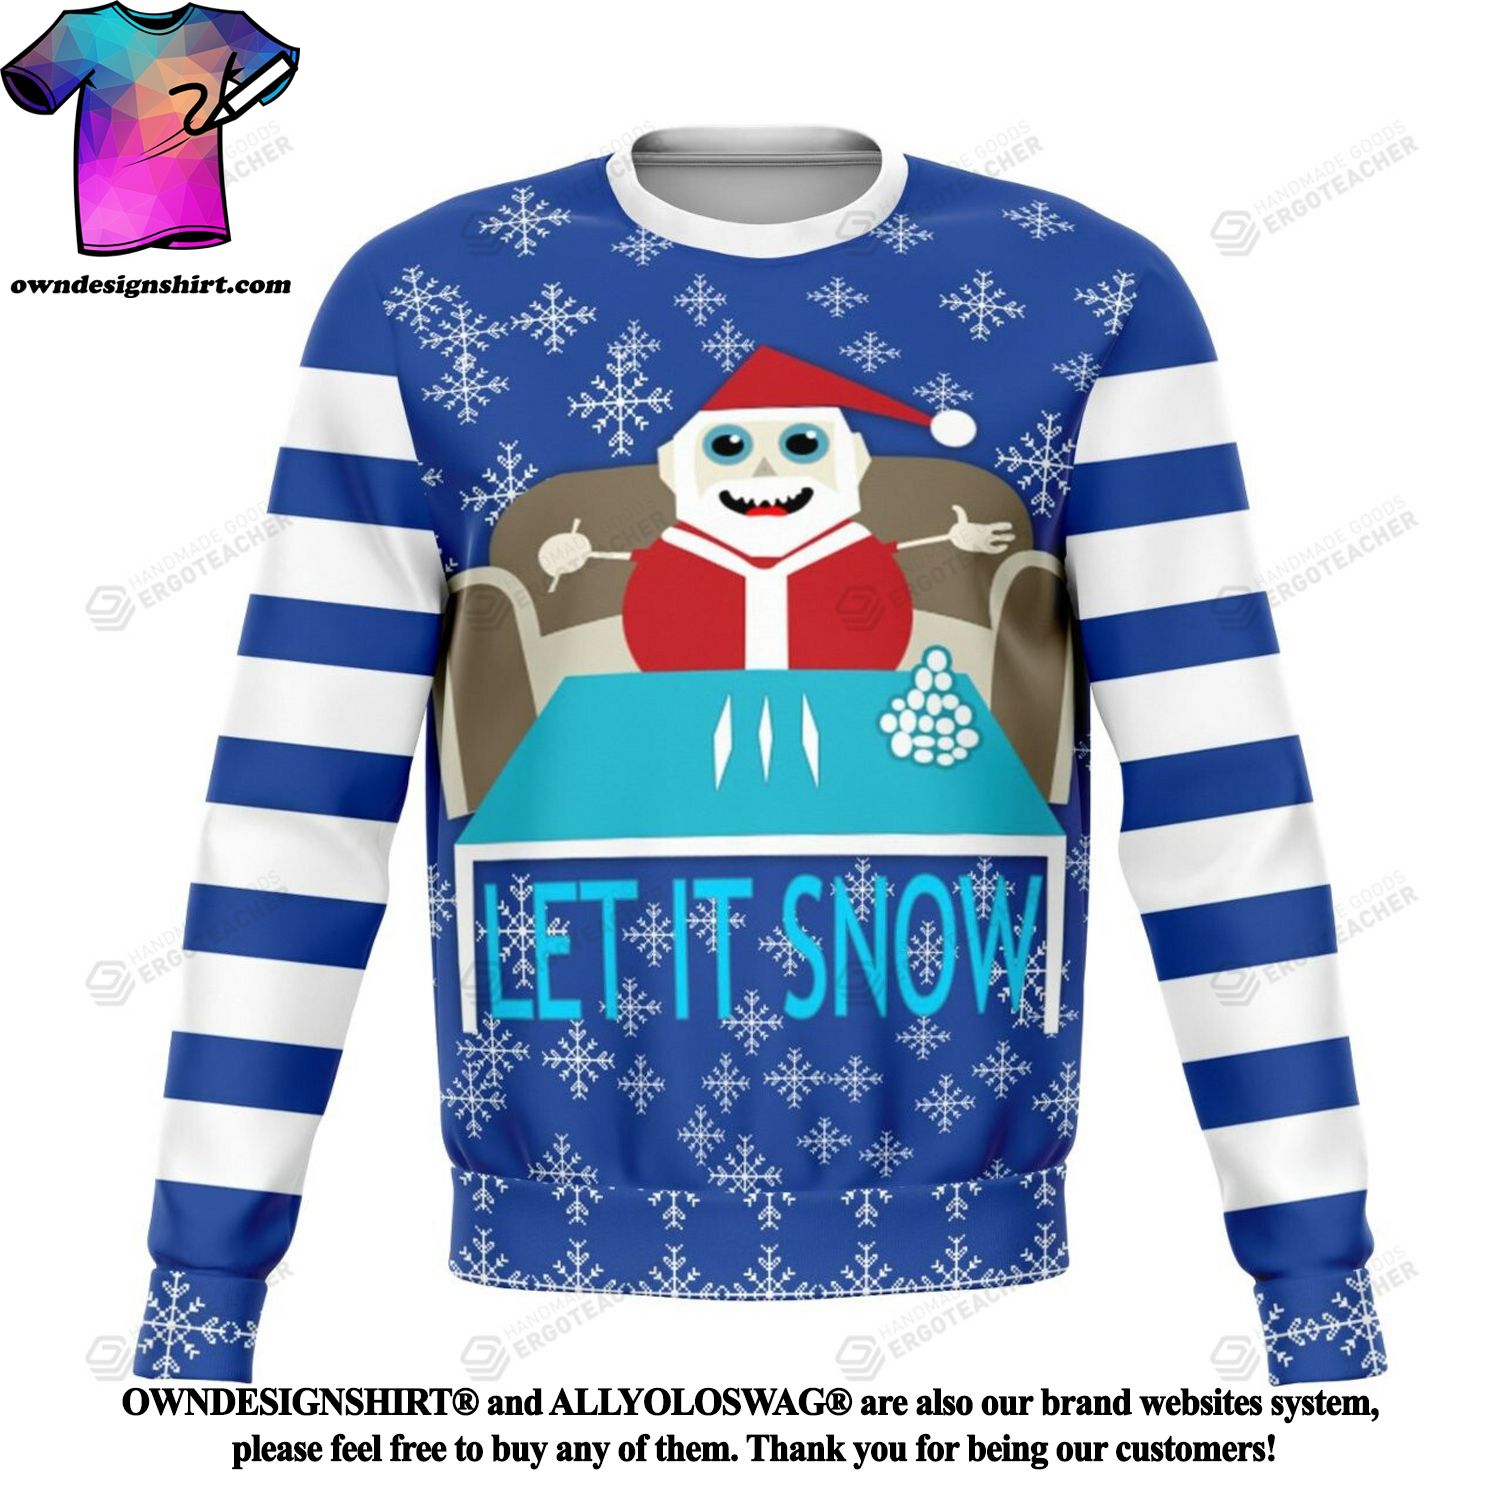 [The best selling] Let It Snow Offensive 3D Printed Ugly Christmas Sweater